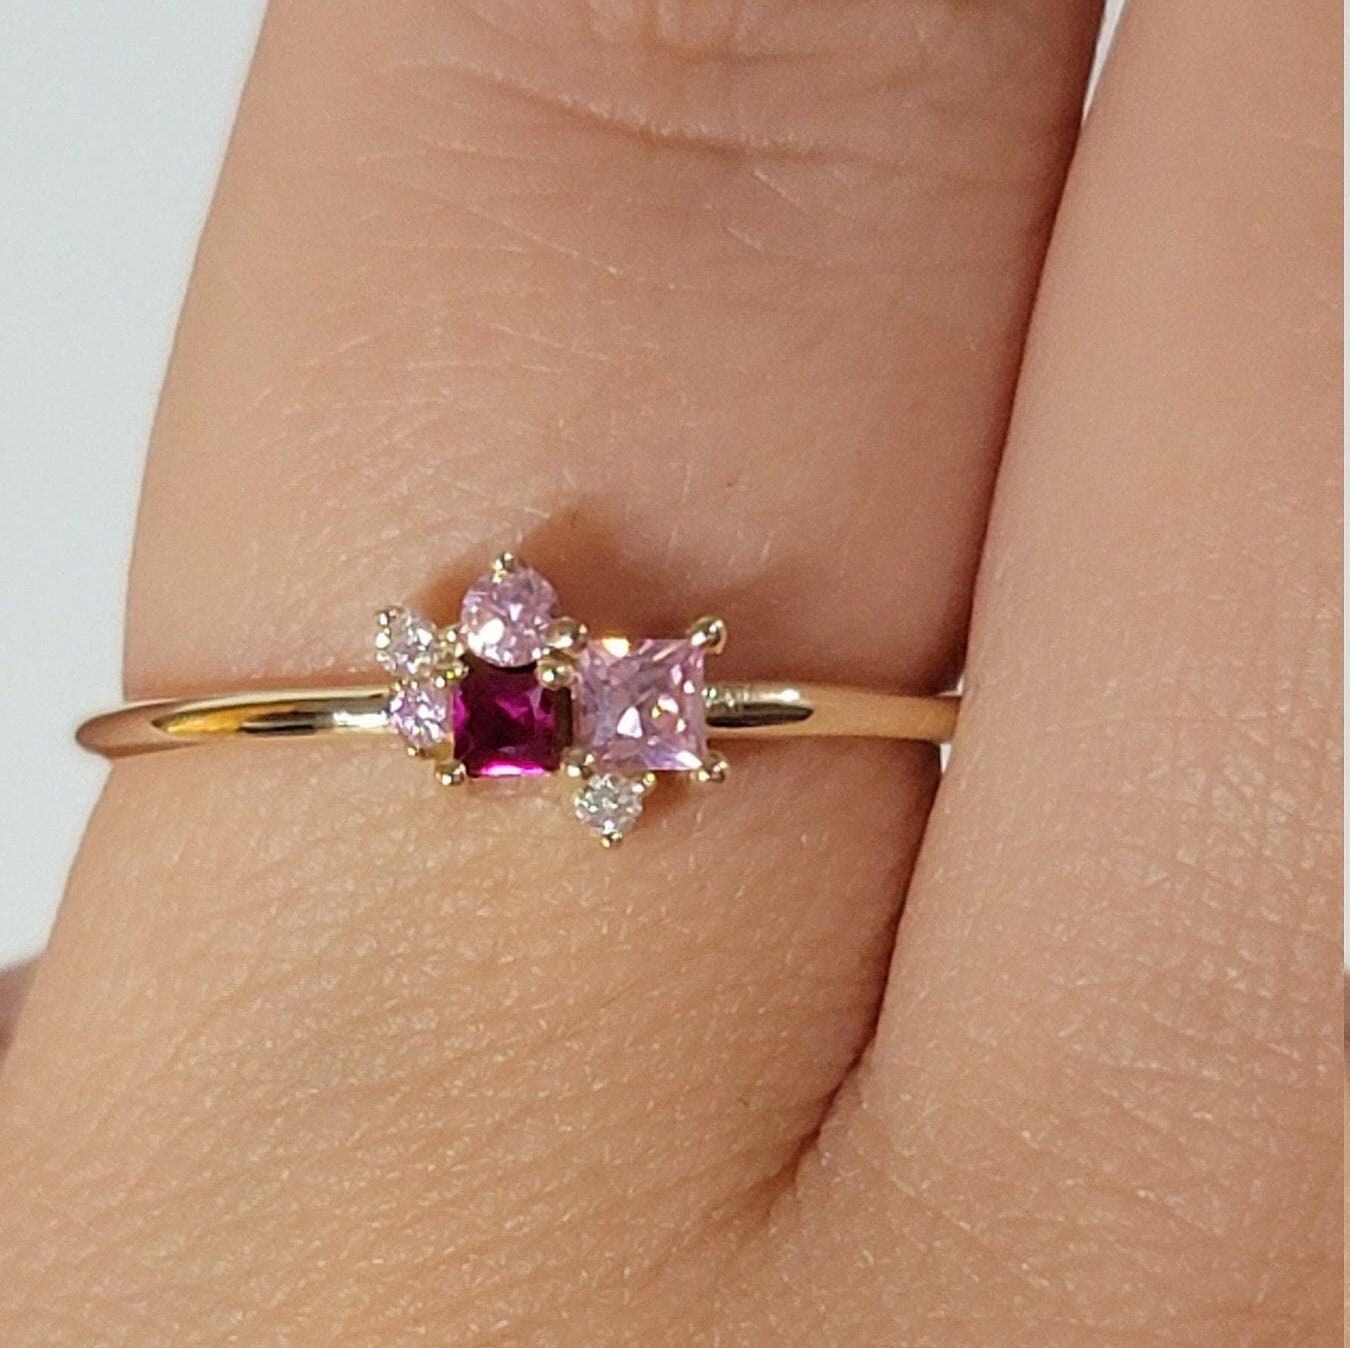 Ruby Diamond Ring in 14k Solid Gold, Cluster Diamond Ring, Personalized Ring, Birthstone Rings, Pink Sapphire and diamond Ring